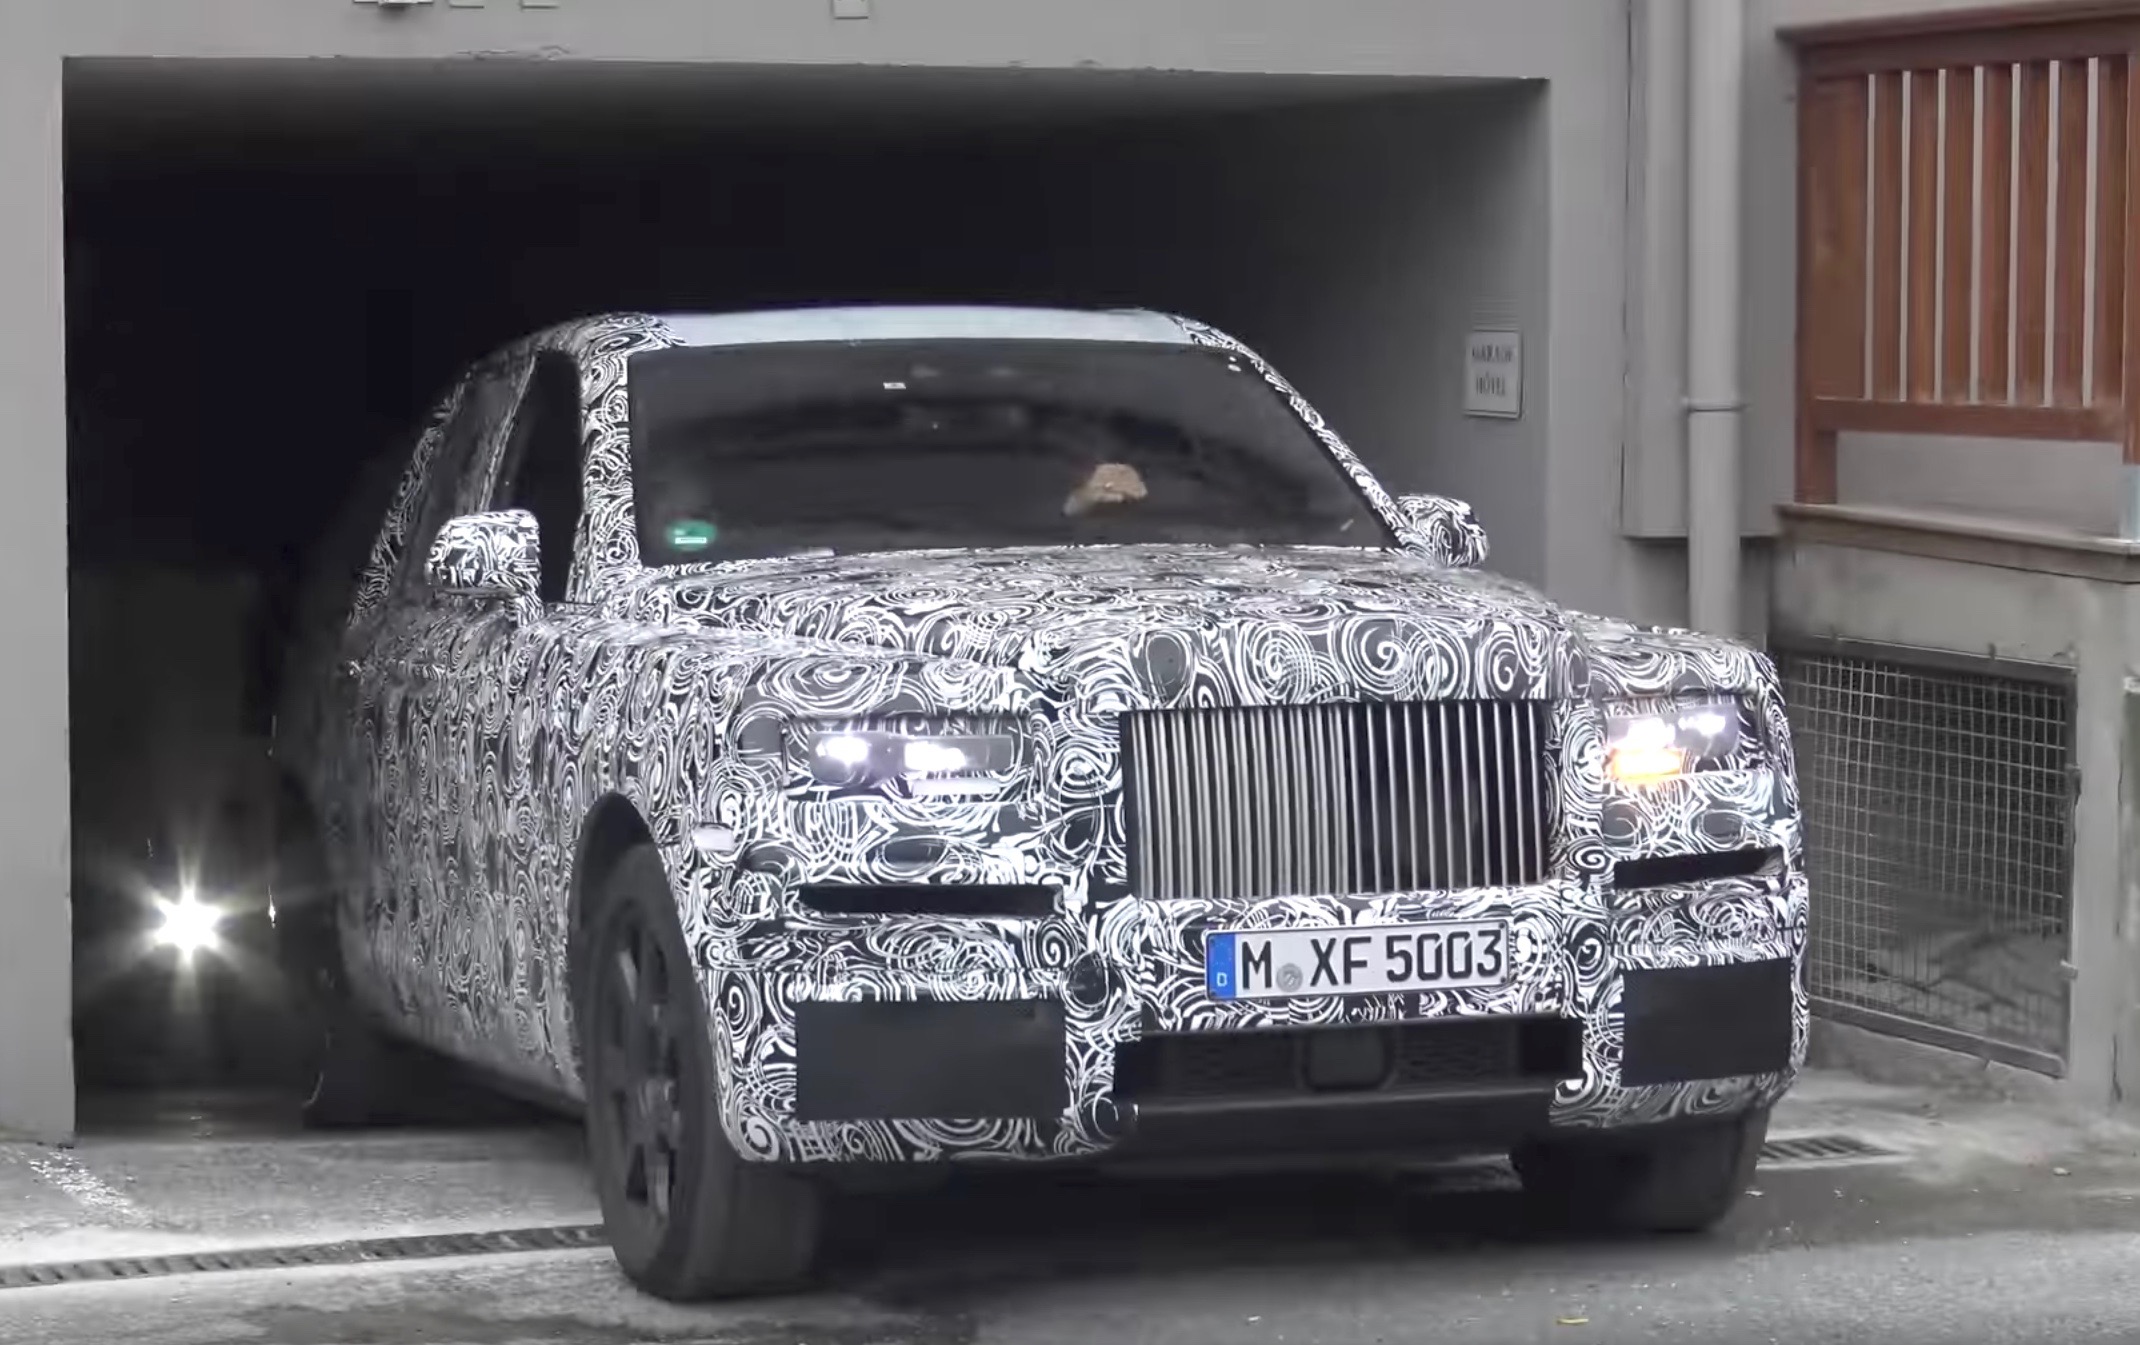 Rolls-Royce Cullinan SUV spotted leaving mysterious garage in Germany (video)